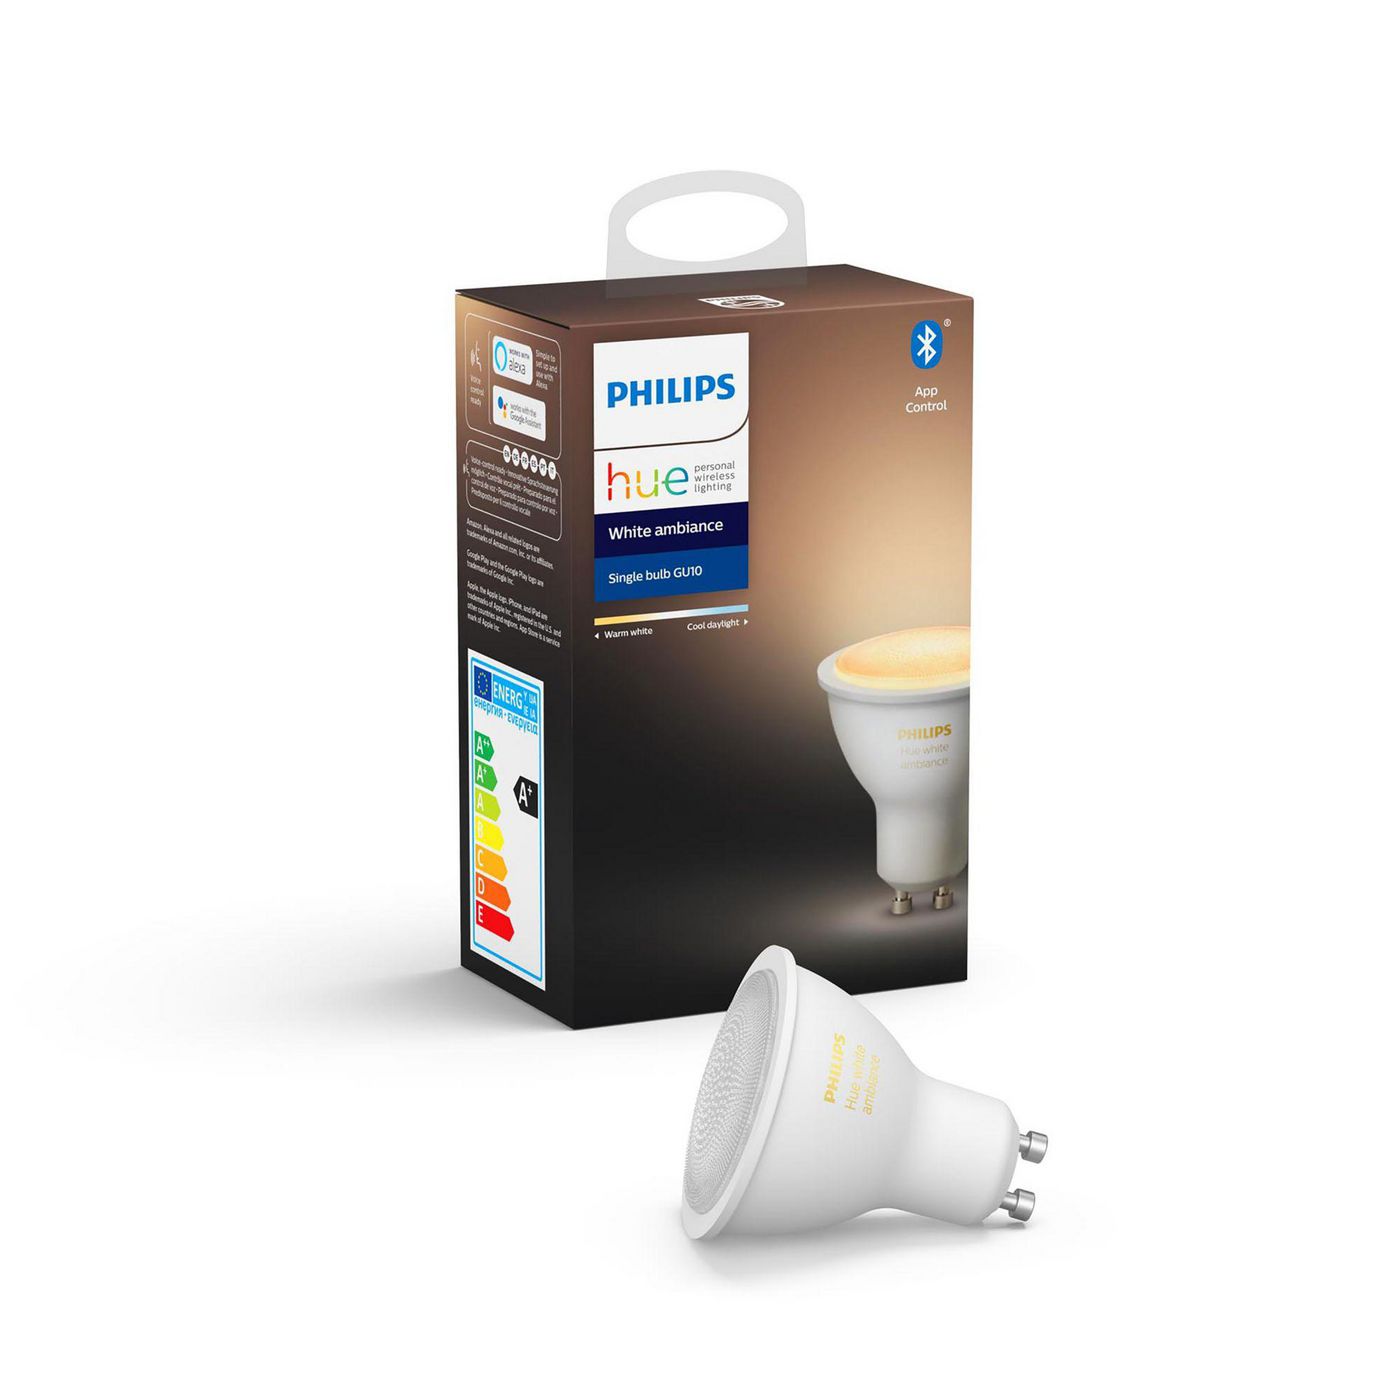 Philips-by-Signify 929001953301 Hue White Ambiance GU10 Bulb 